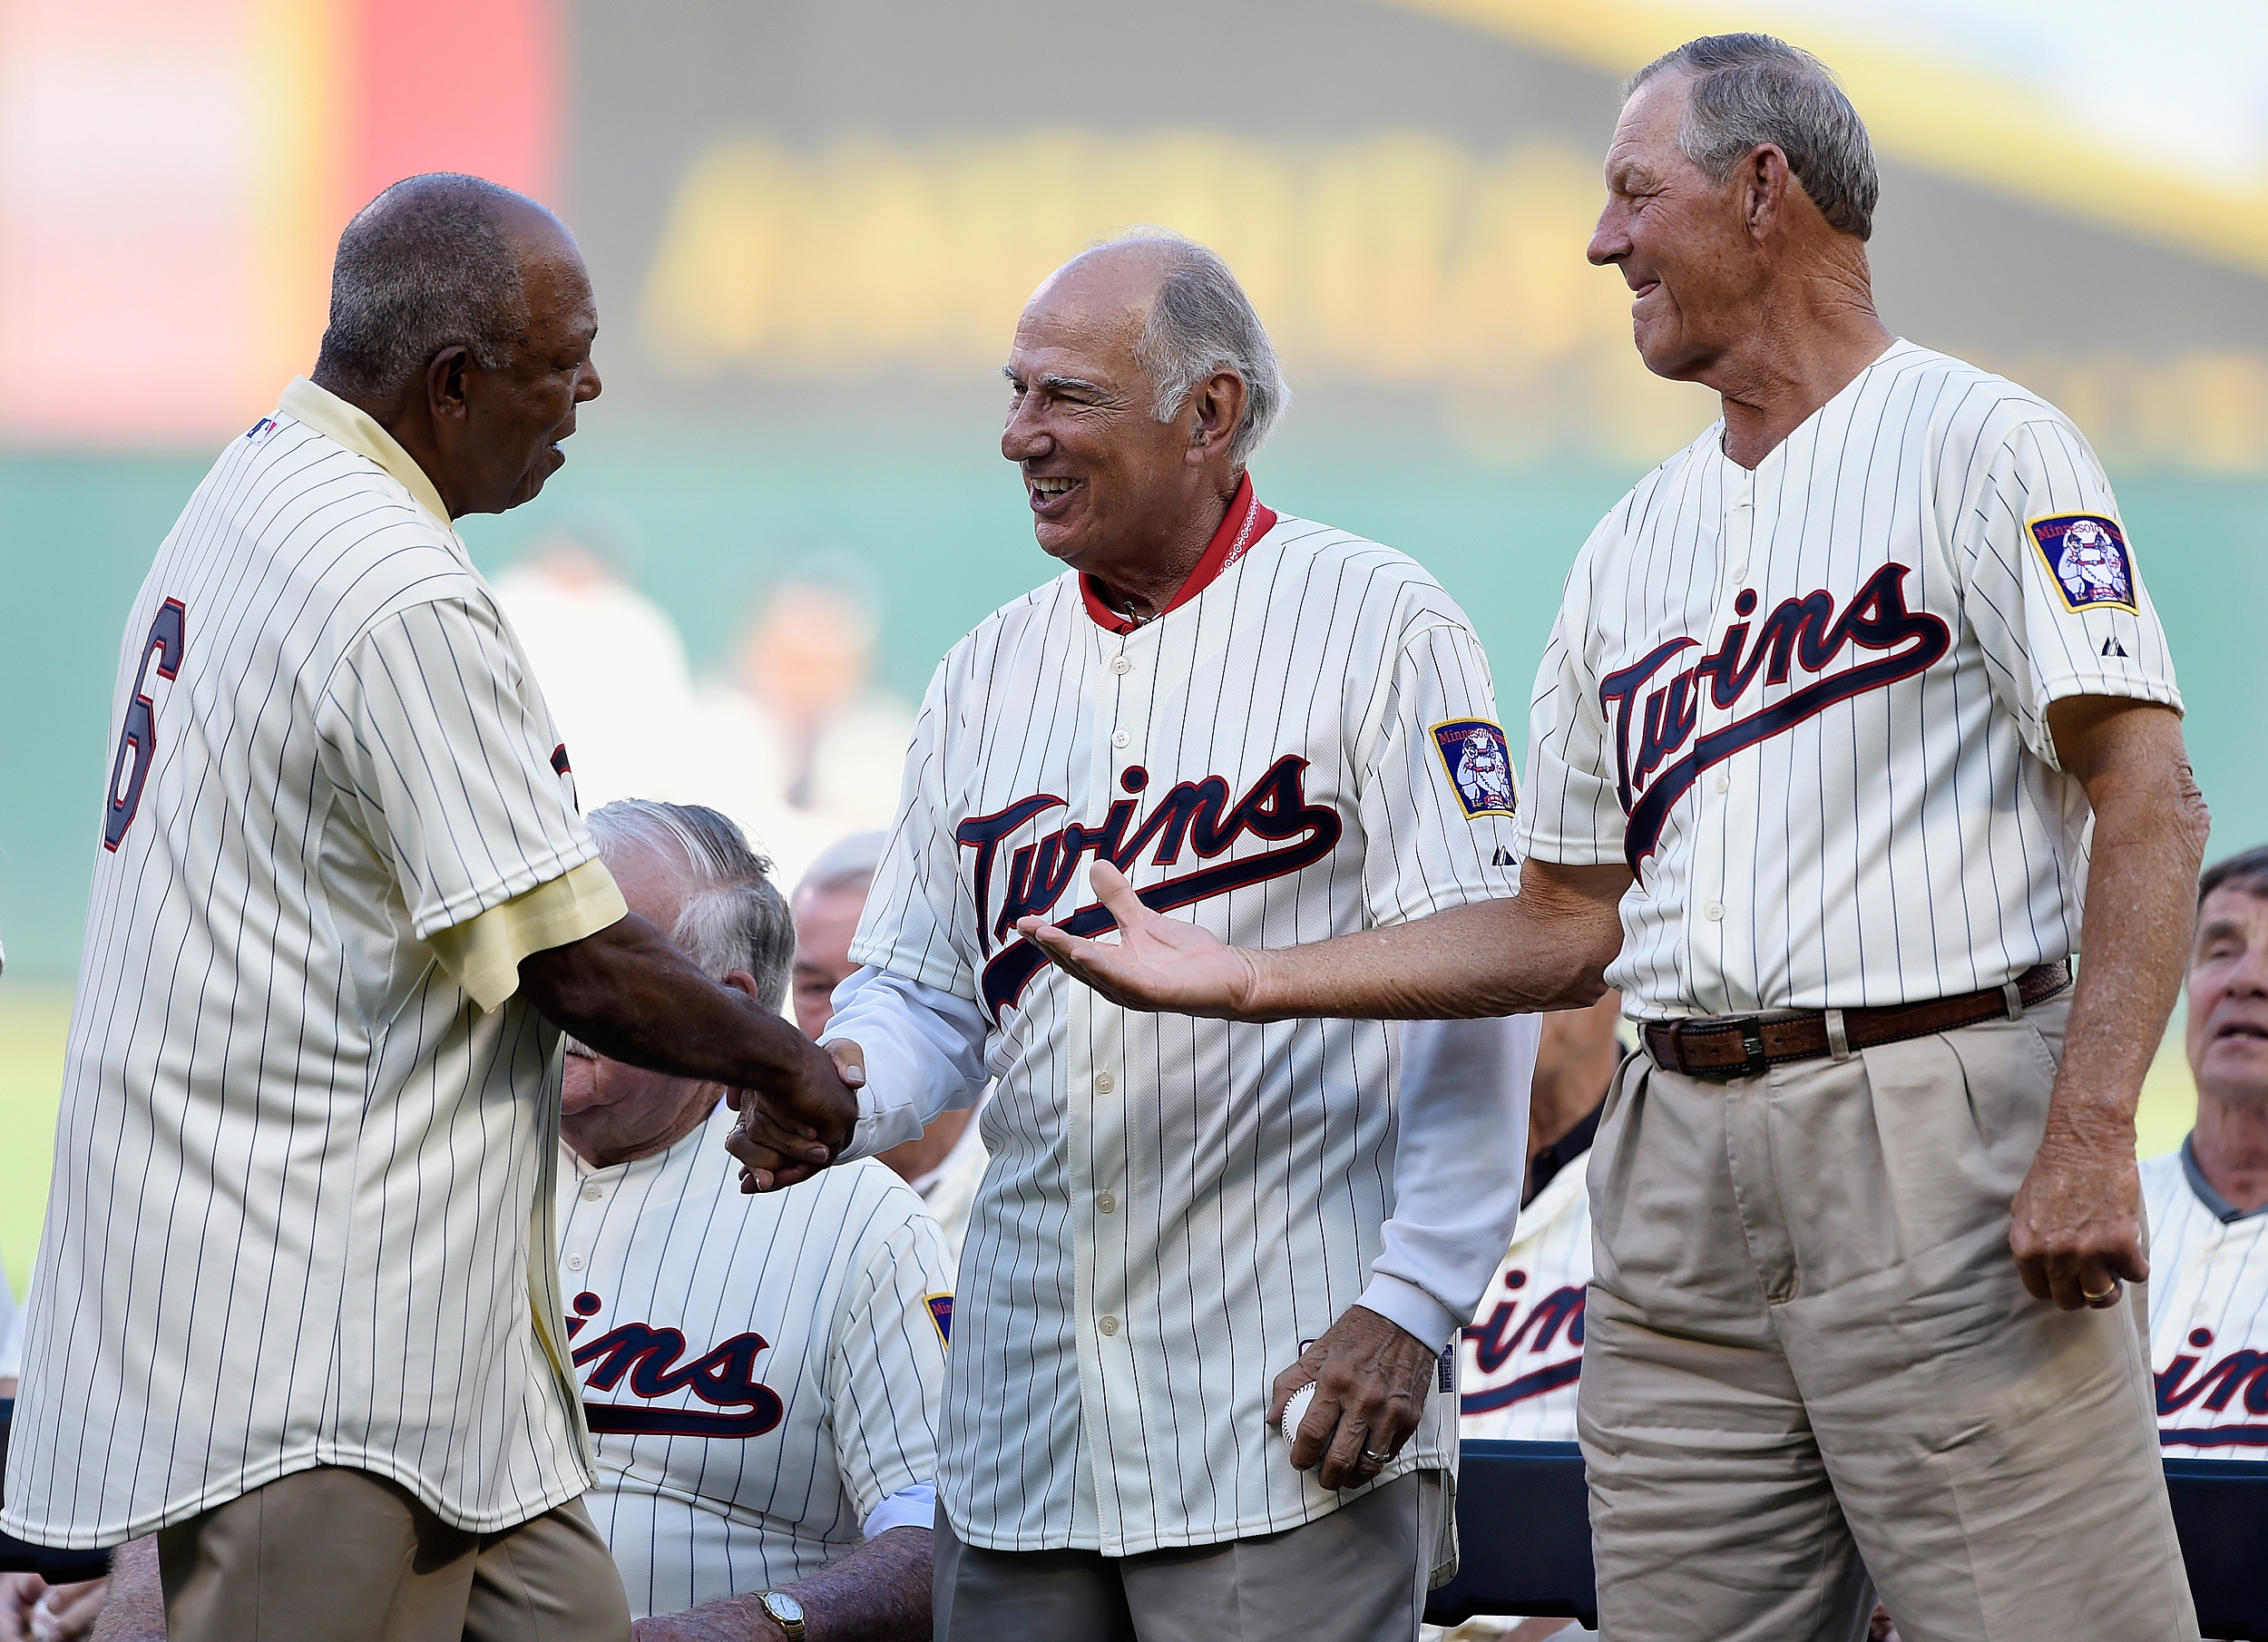 Jim Kaat, Tony Oliva overwhelmed to go into Hall of Fame together